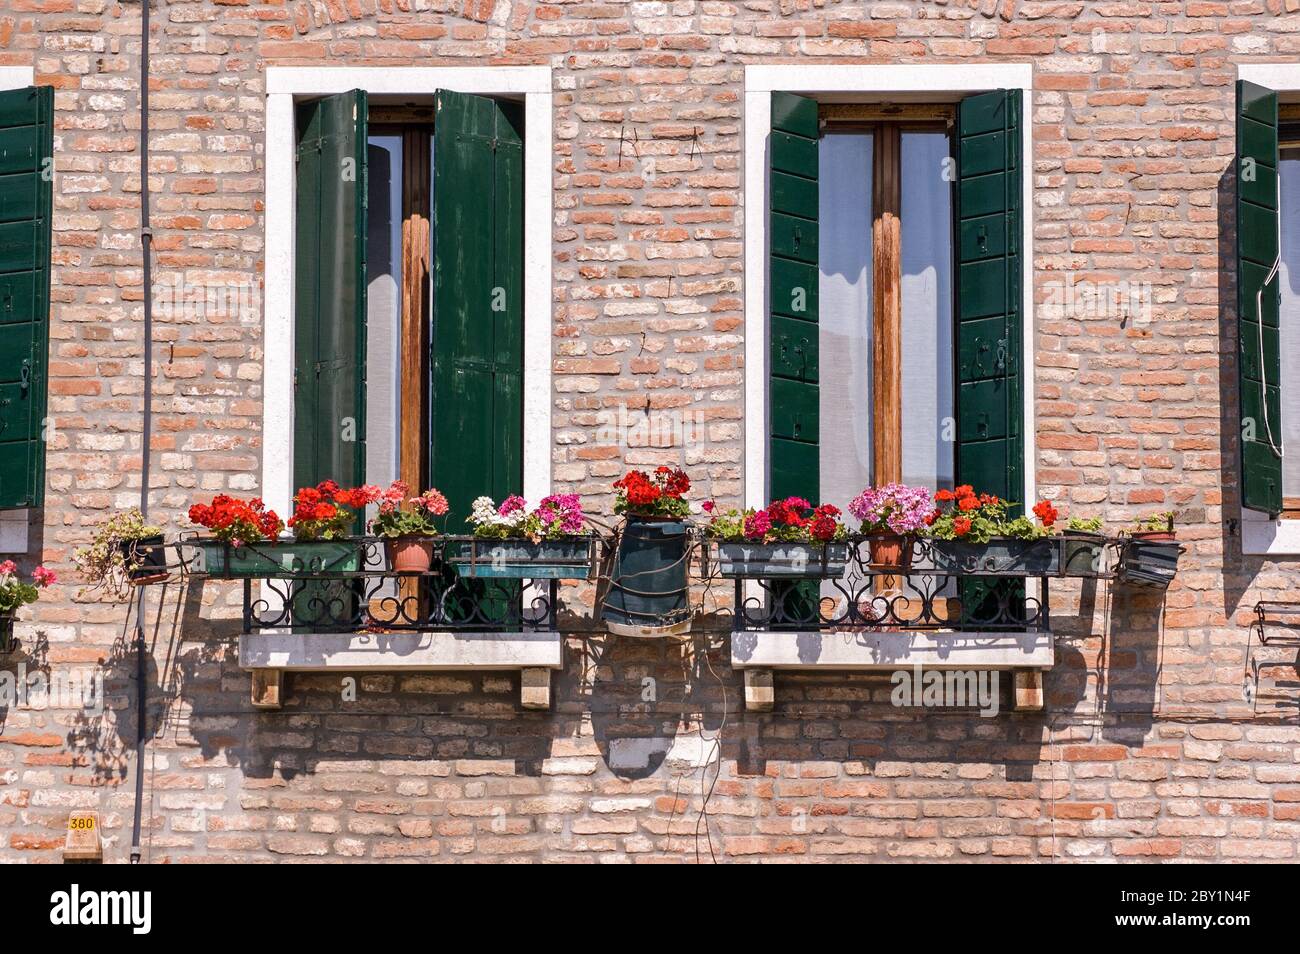 Traditional Italian balconies with perlagonium filled window boxes. Venice, Italy. Stock Photo